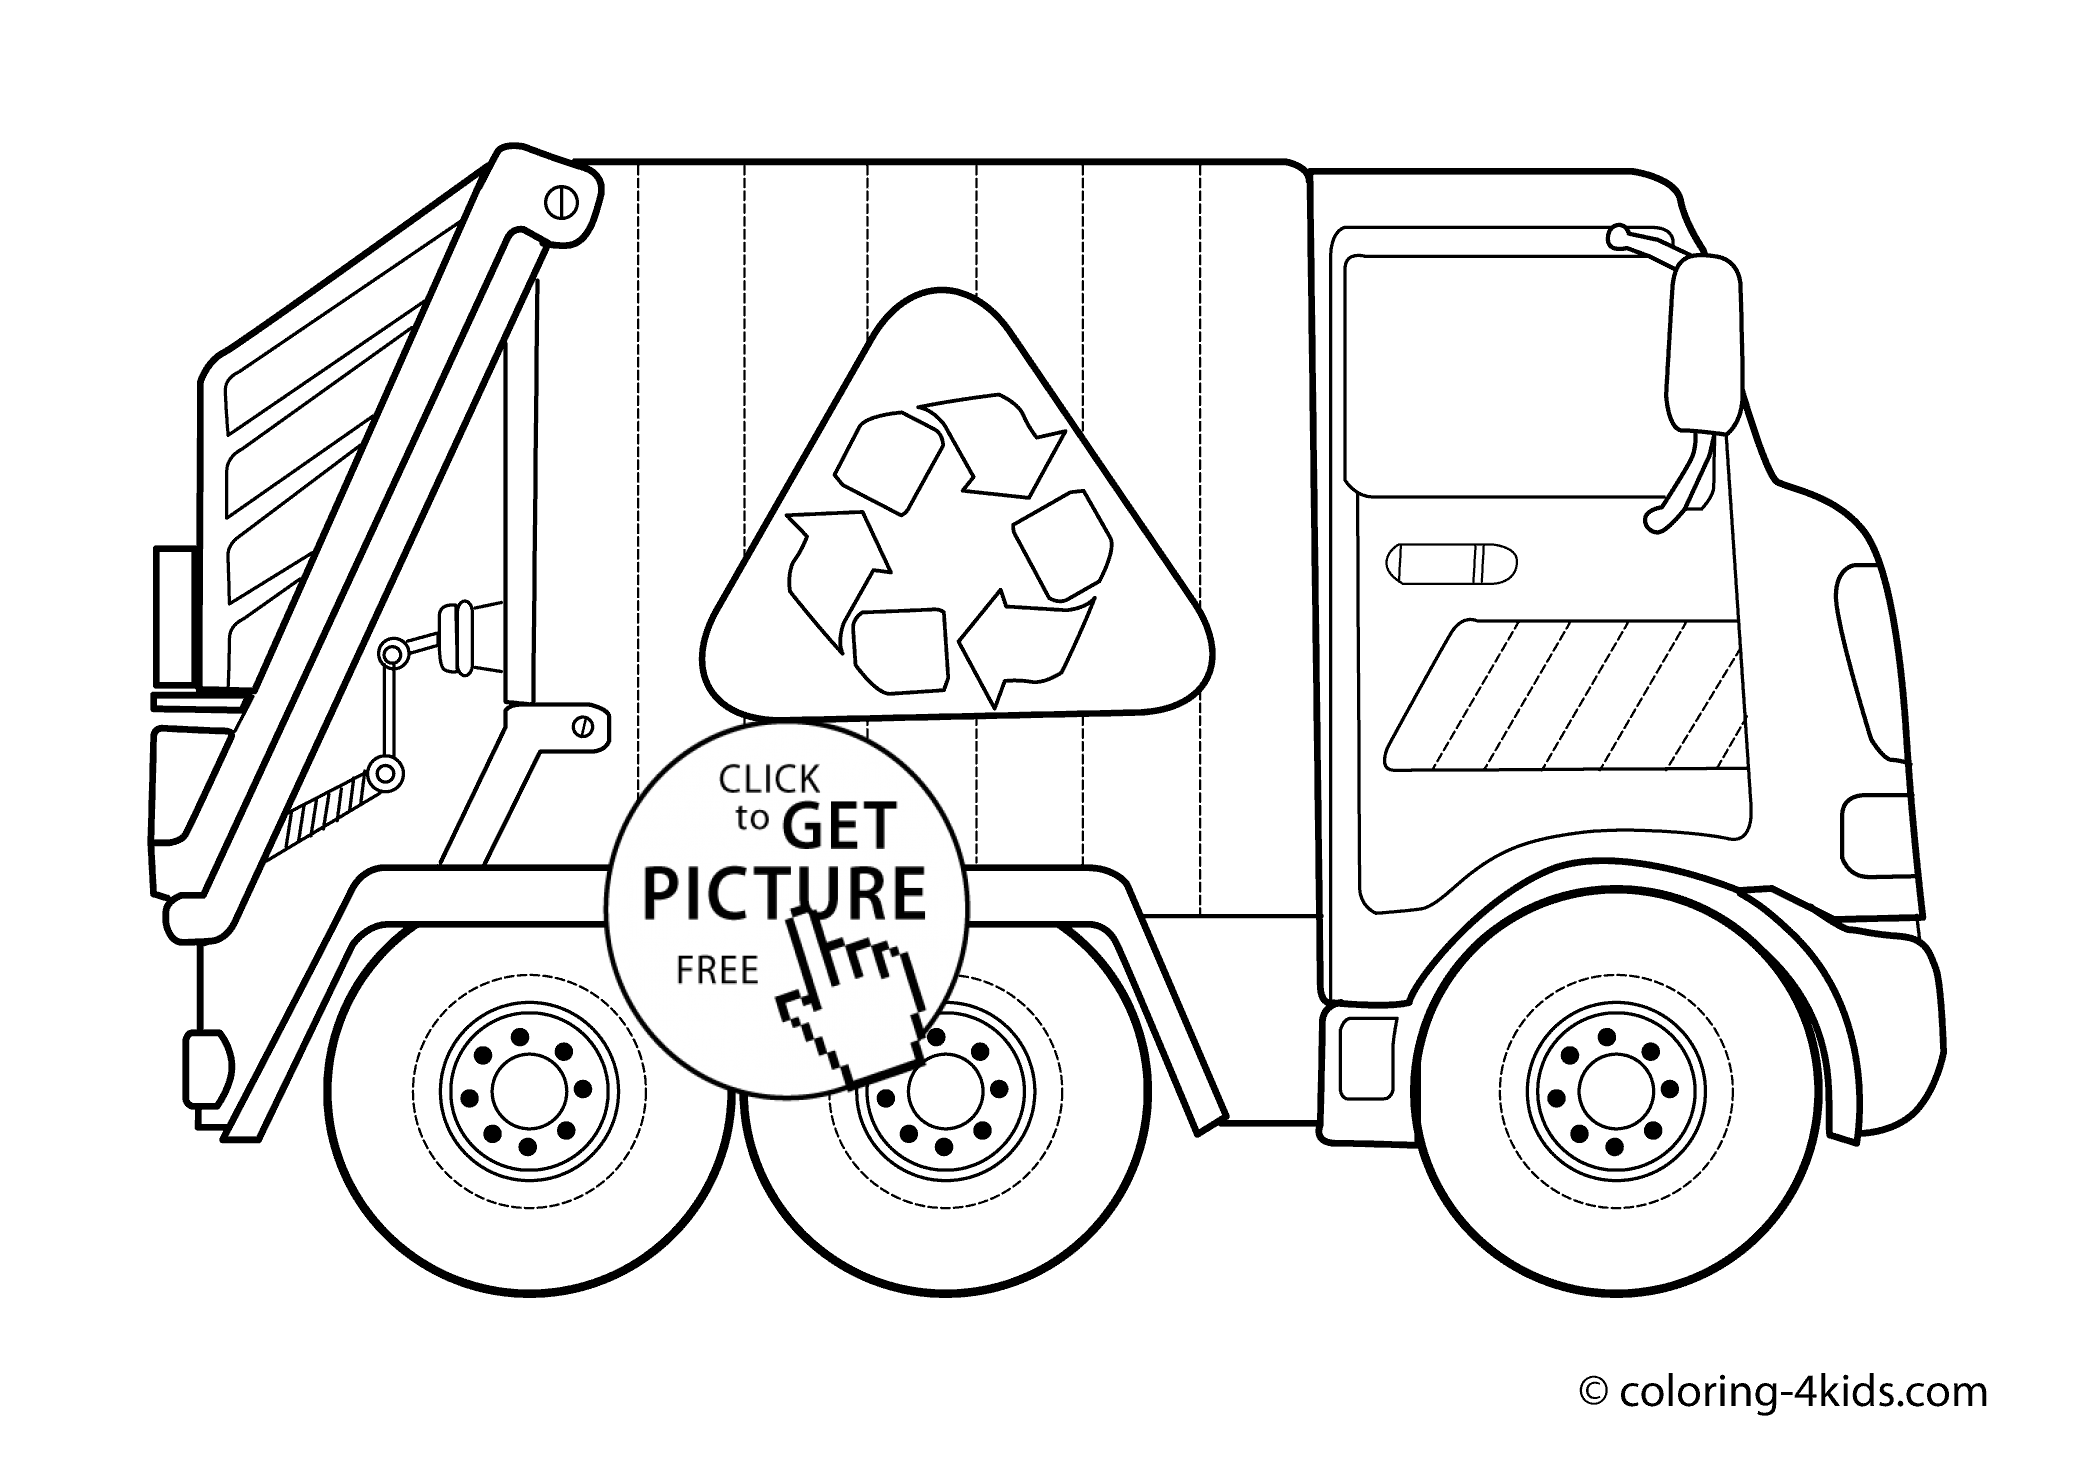 Garbage Truck Transportation Coloring Pages for kids, printable free |  coloing-4kids.com